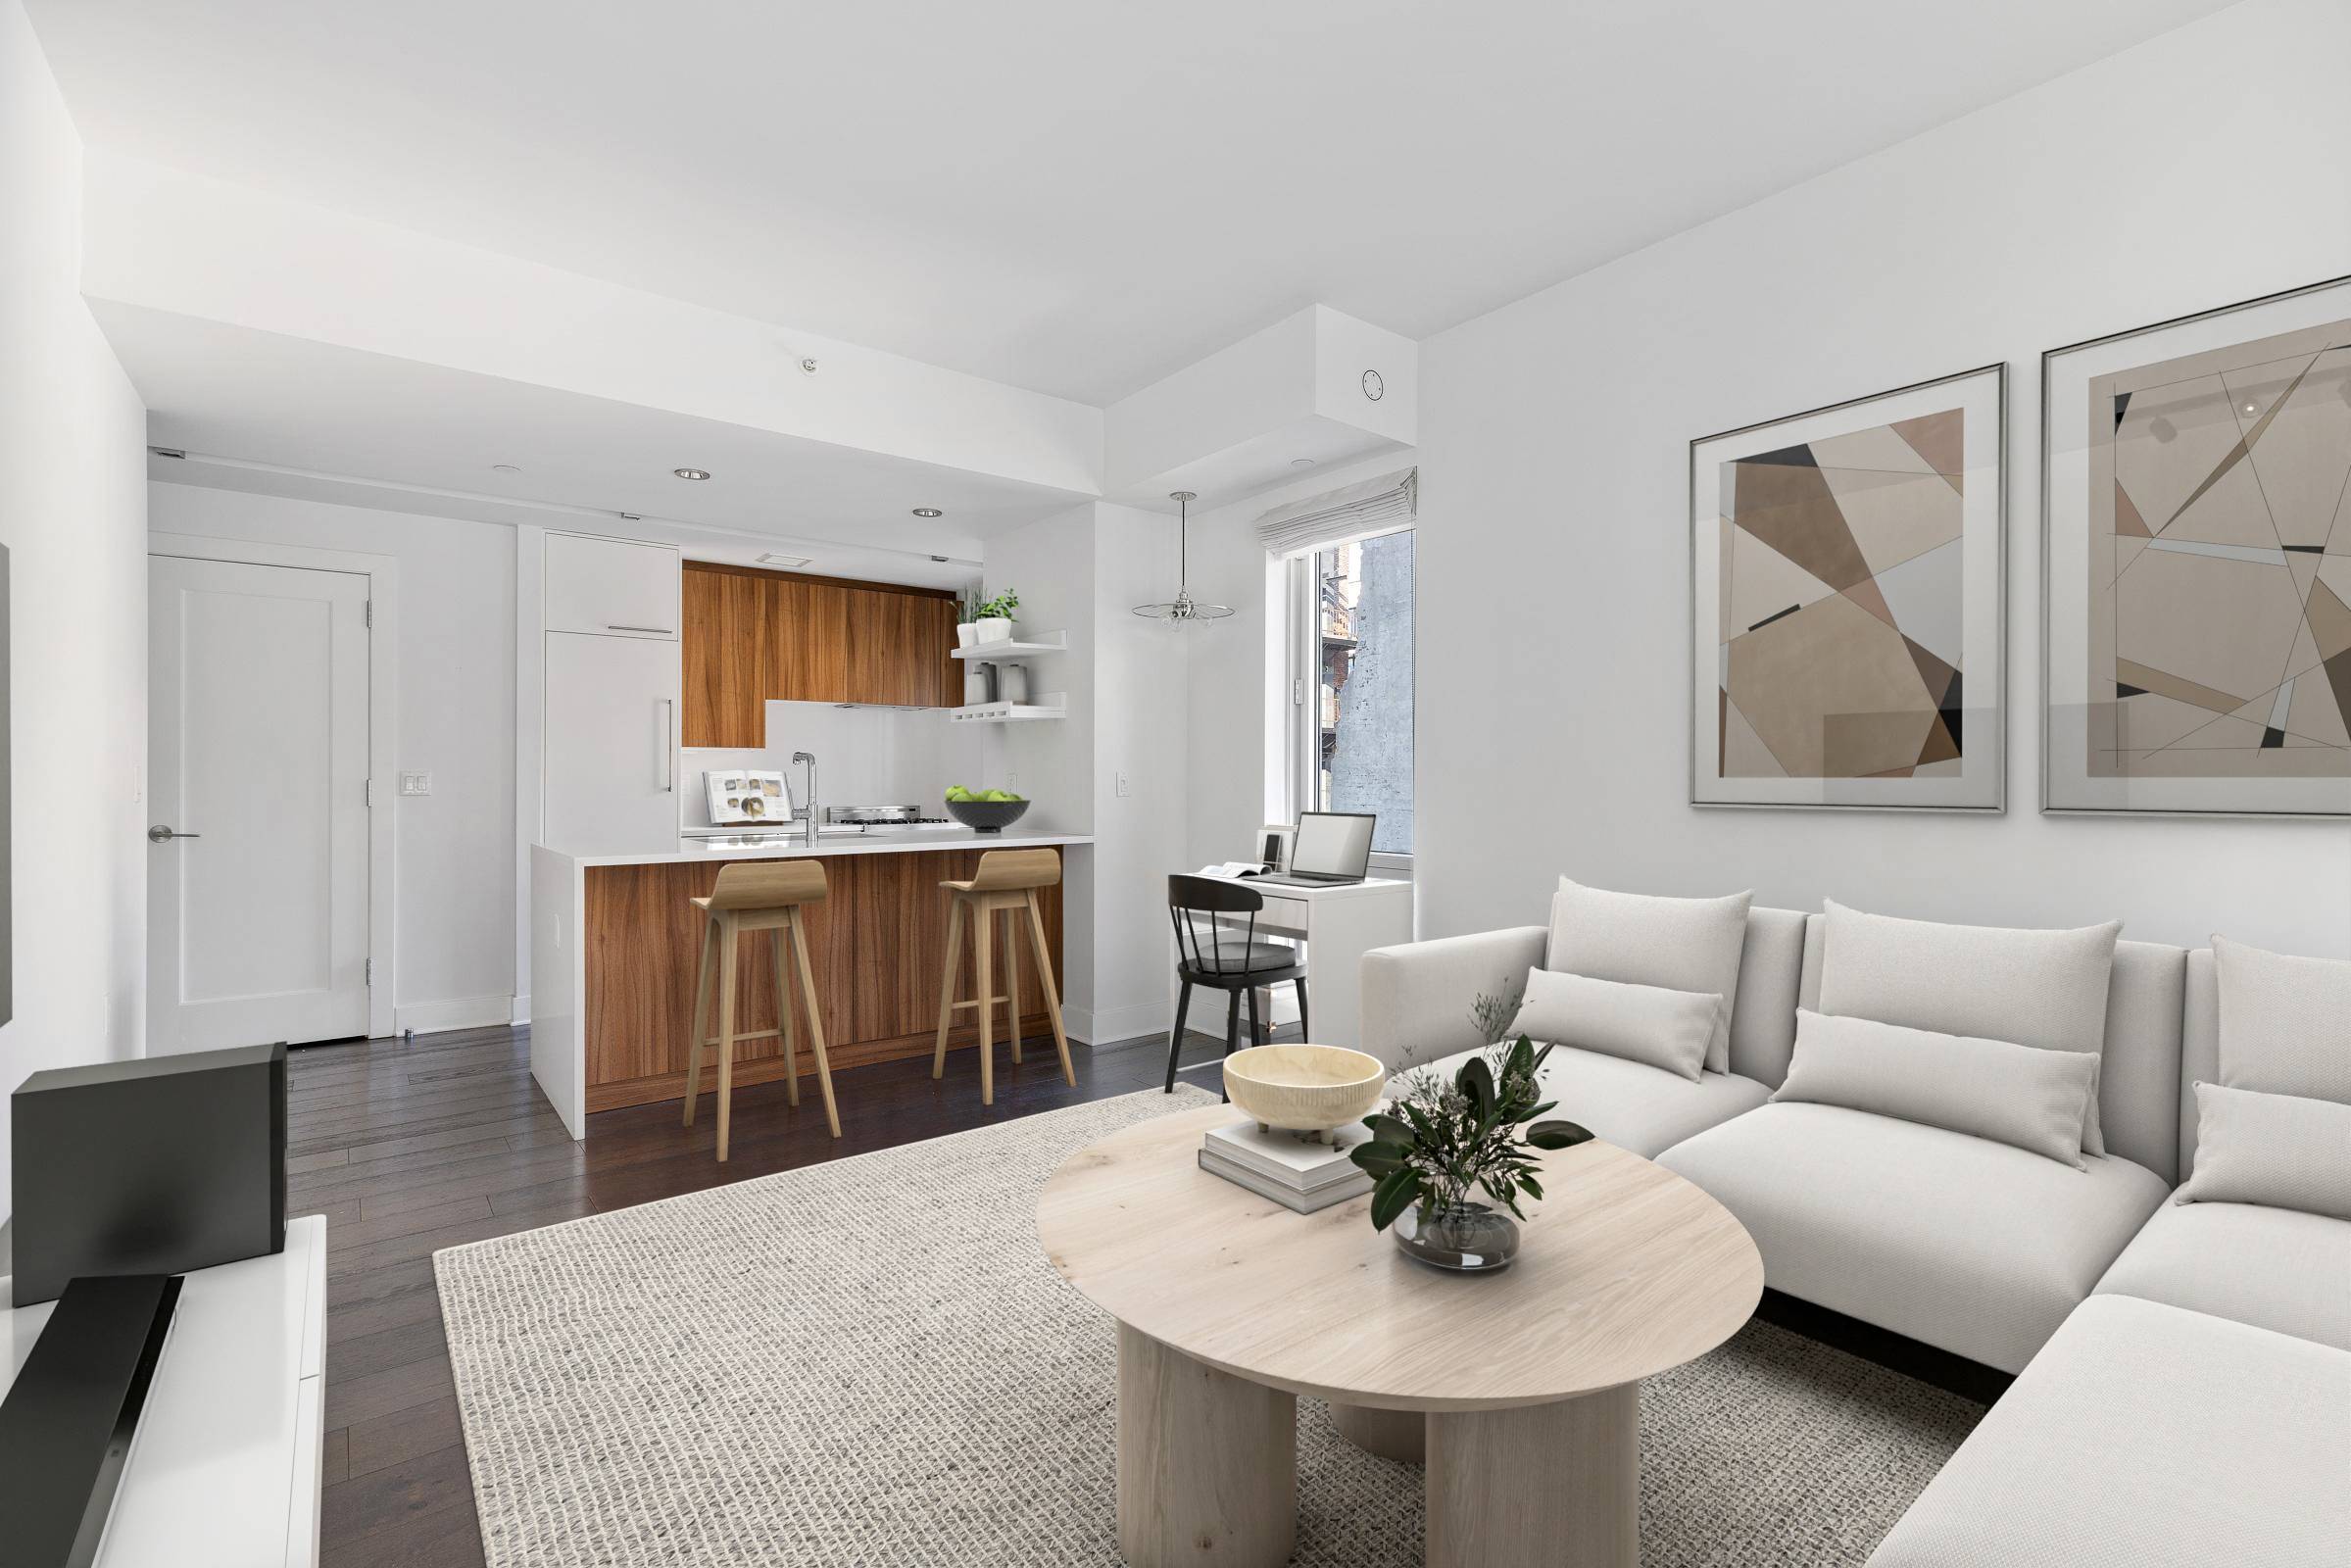 Welcome to Unit 3D, located within TWO12, a highly coveted boutique condominium in the heart of Williamsburg, being offered for rent for the first time.